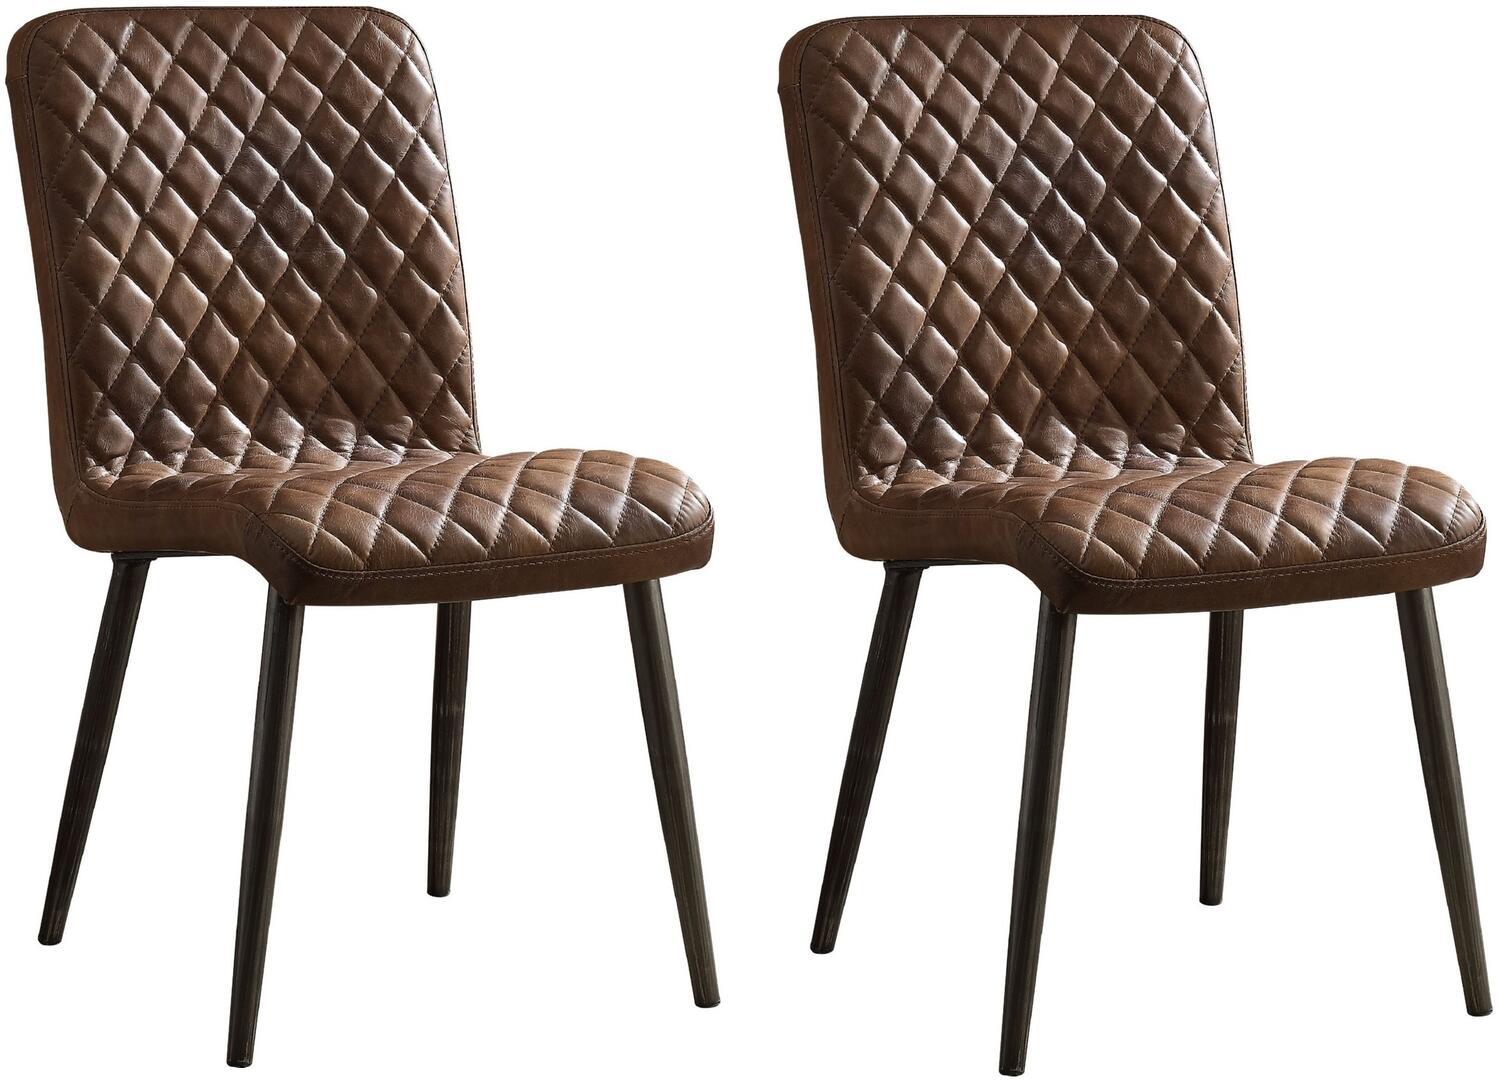 Modern Side Chair Set Millerton 70423-2pcs in Chocolate Top grain leather